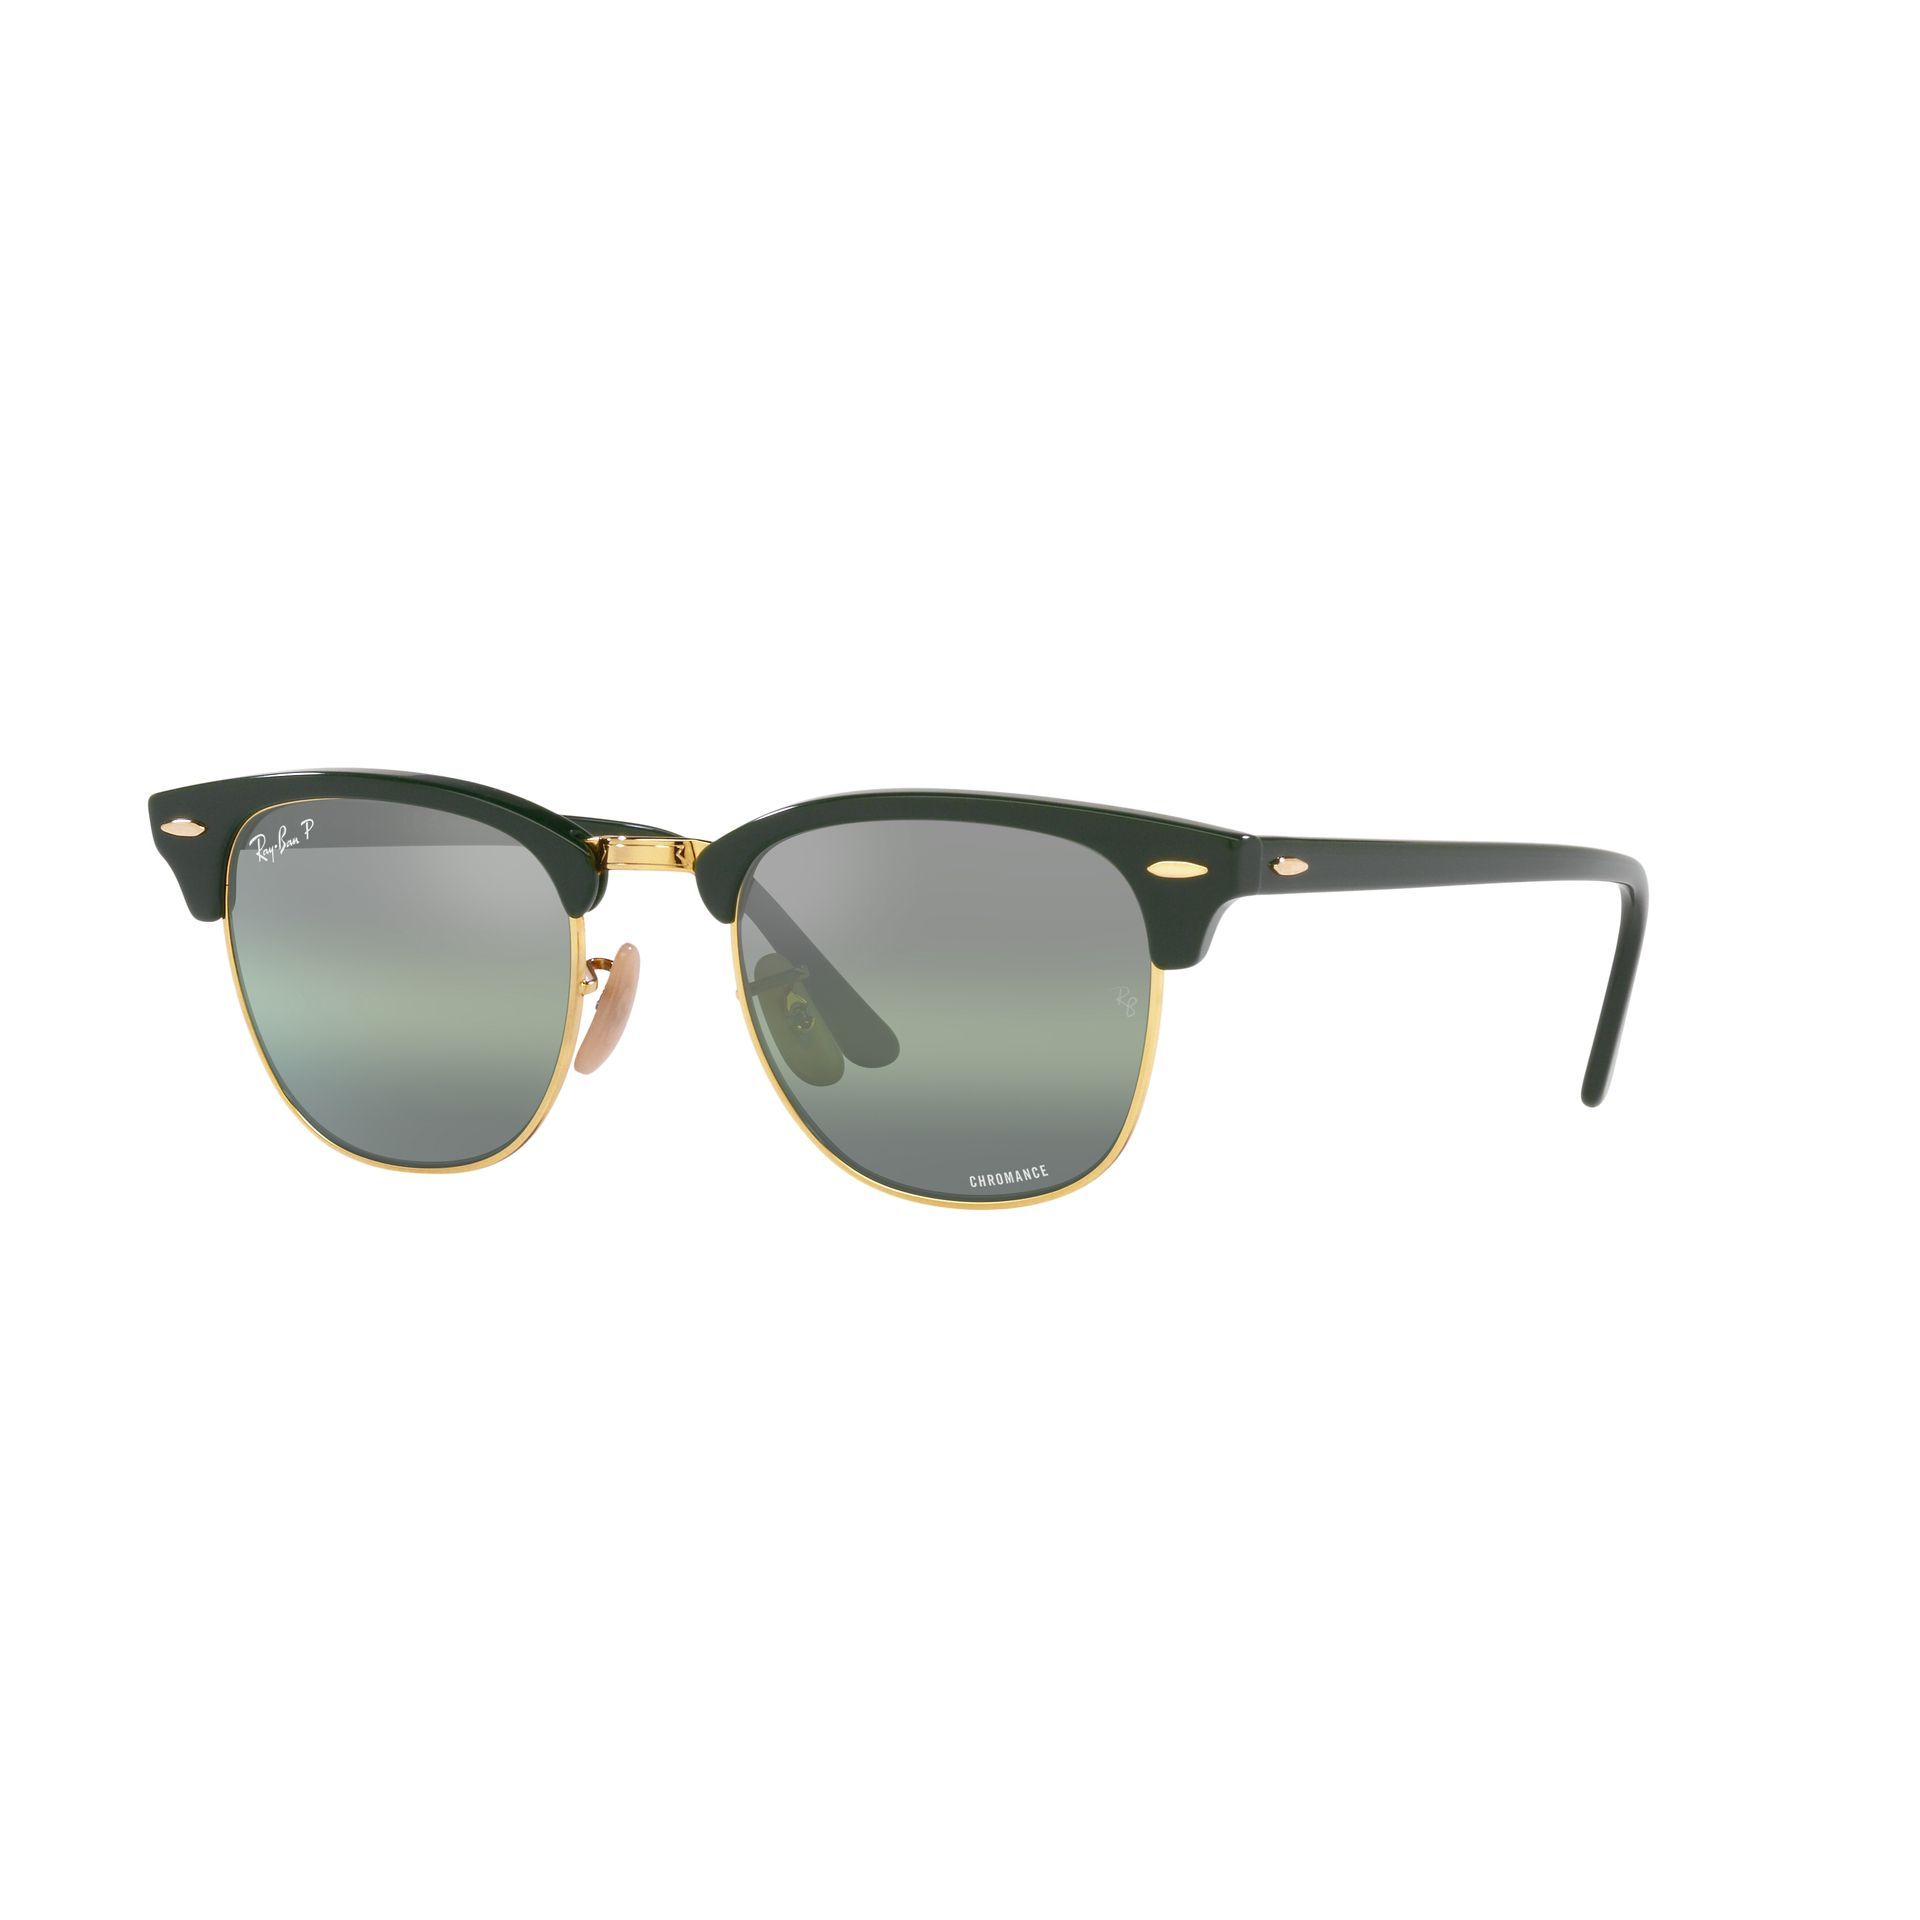 0RB3016 Clubmaster Sunglasses 1368G4 - size 51